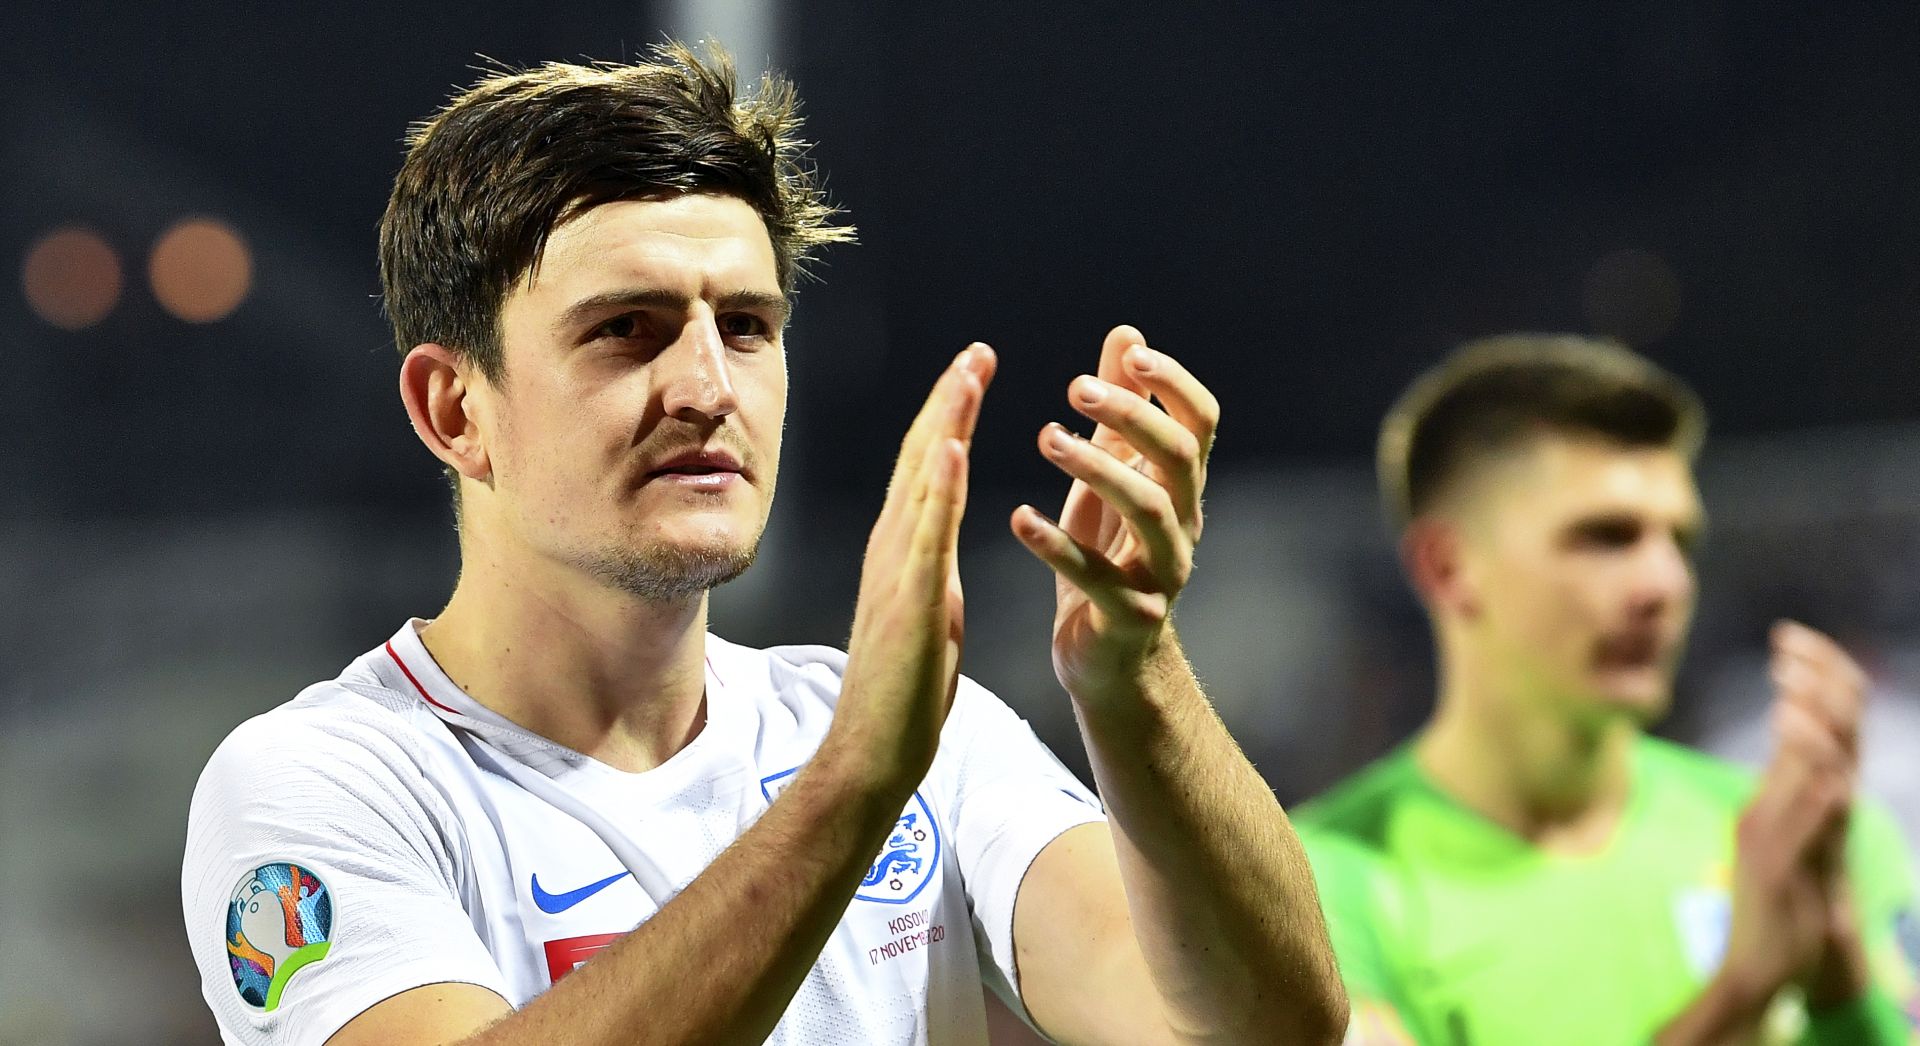 epa08624563 (FILE) - England's Harry Maguire applauds supporters after the UEFA EURO 2020 group A qualifying soccer match between Kosovo and England in Pristina, Kosovo, 17 November 2019 (reissued 02 August 2020). England manager Southgate on 25 August 2020 confirmed the Manchester Unted captain Maguire will be part of the national squad for the September 2020 Nations Leage matches. The world's most expensive defender's nomination for the squad comes within a week after being arrested on late 20 August on the Greek island of Mykonos for allgedely attacking police outside a bar.  EPA/GEORGI LICOVSKI *** Local Caption *** 55640426